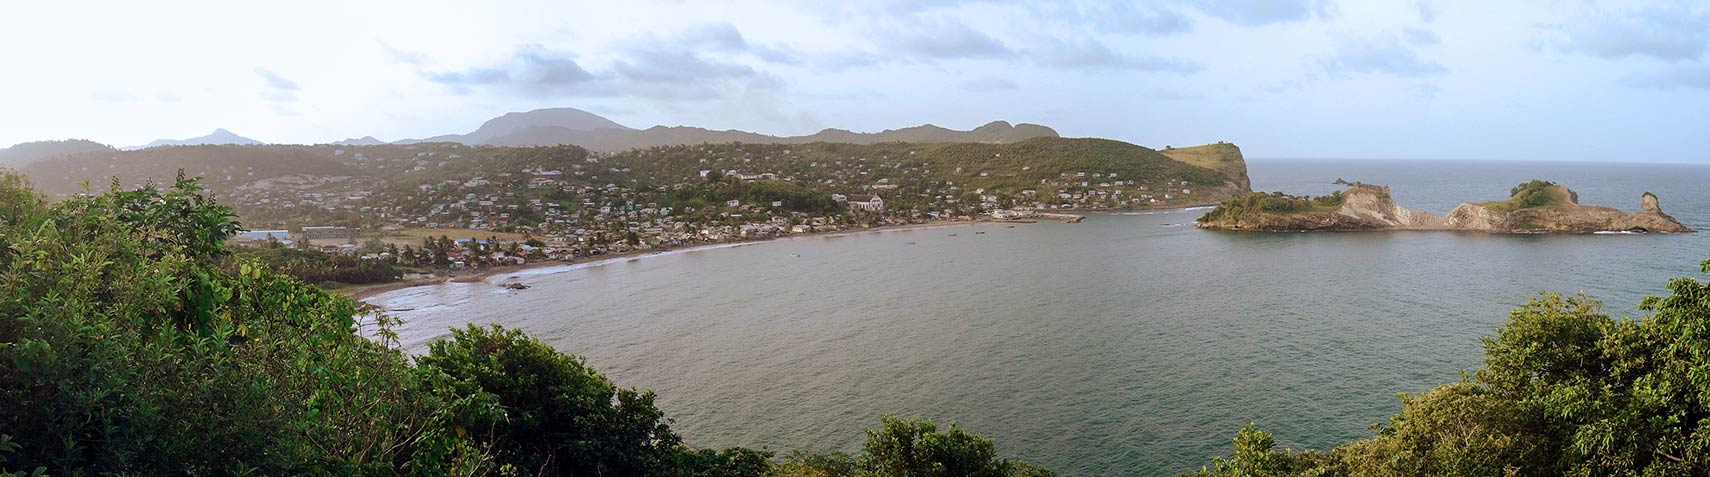 Dennery town on the east coast of the island of Saint Lucia